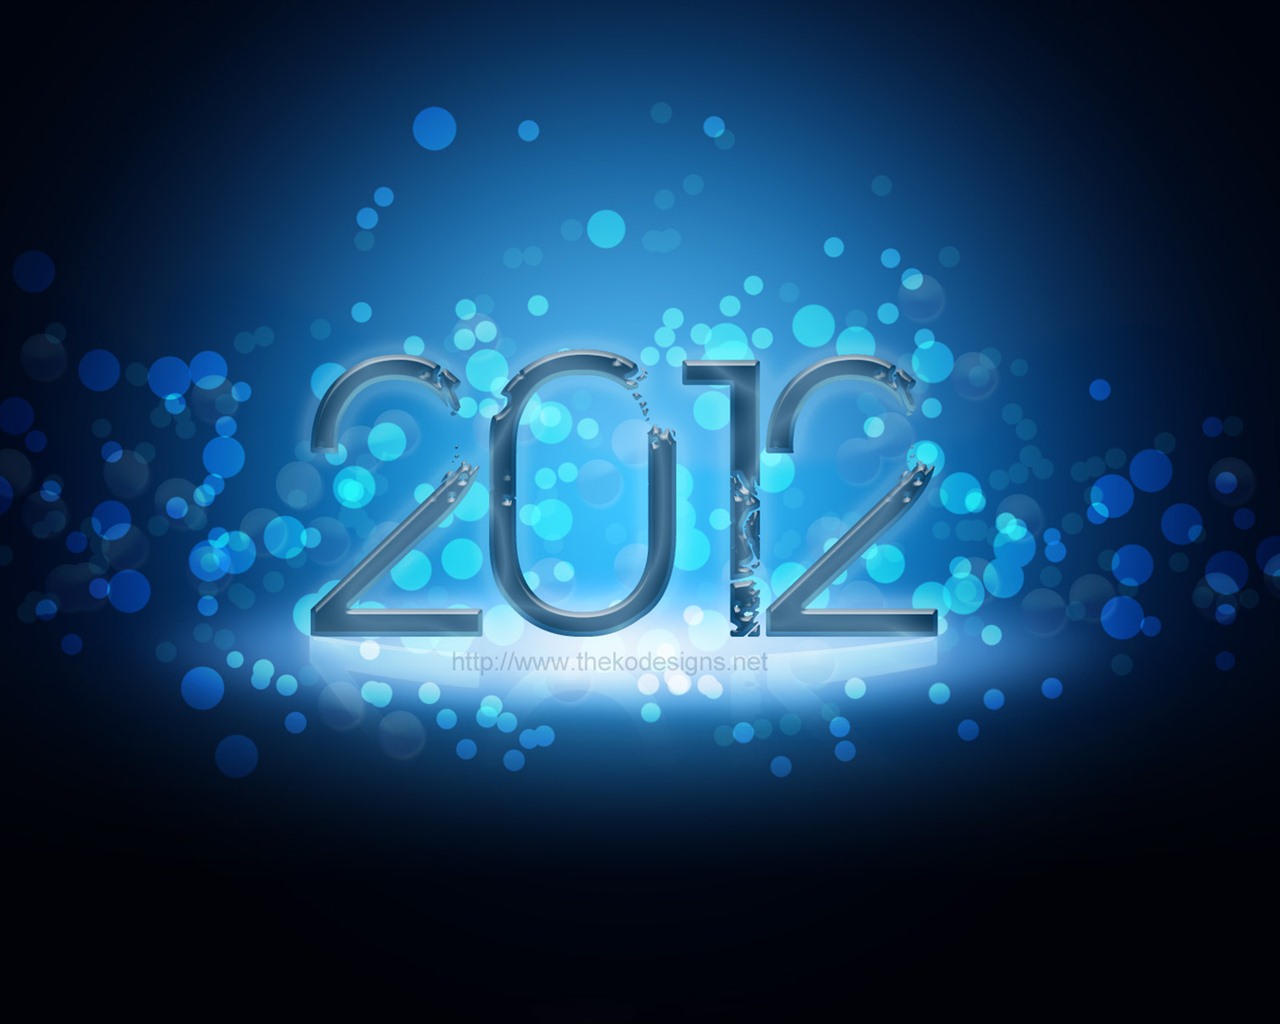 2012 New Year wallpapers (1) #13 - 1280x1024